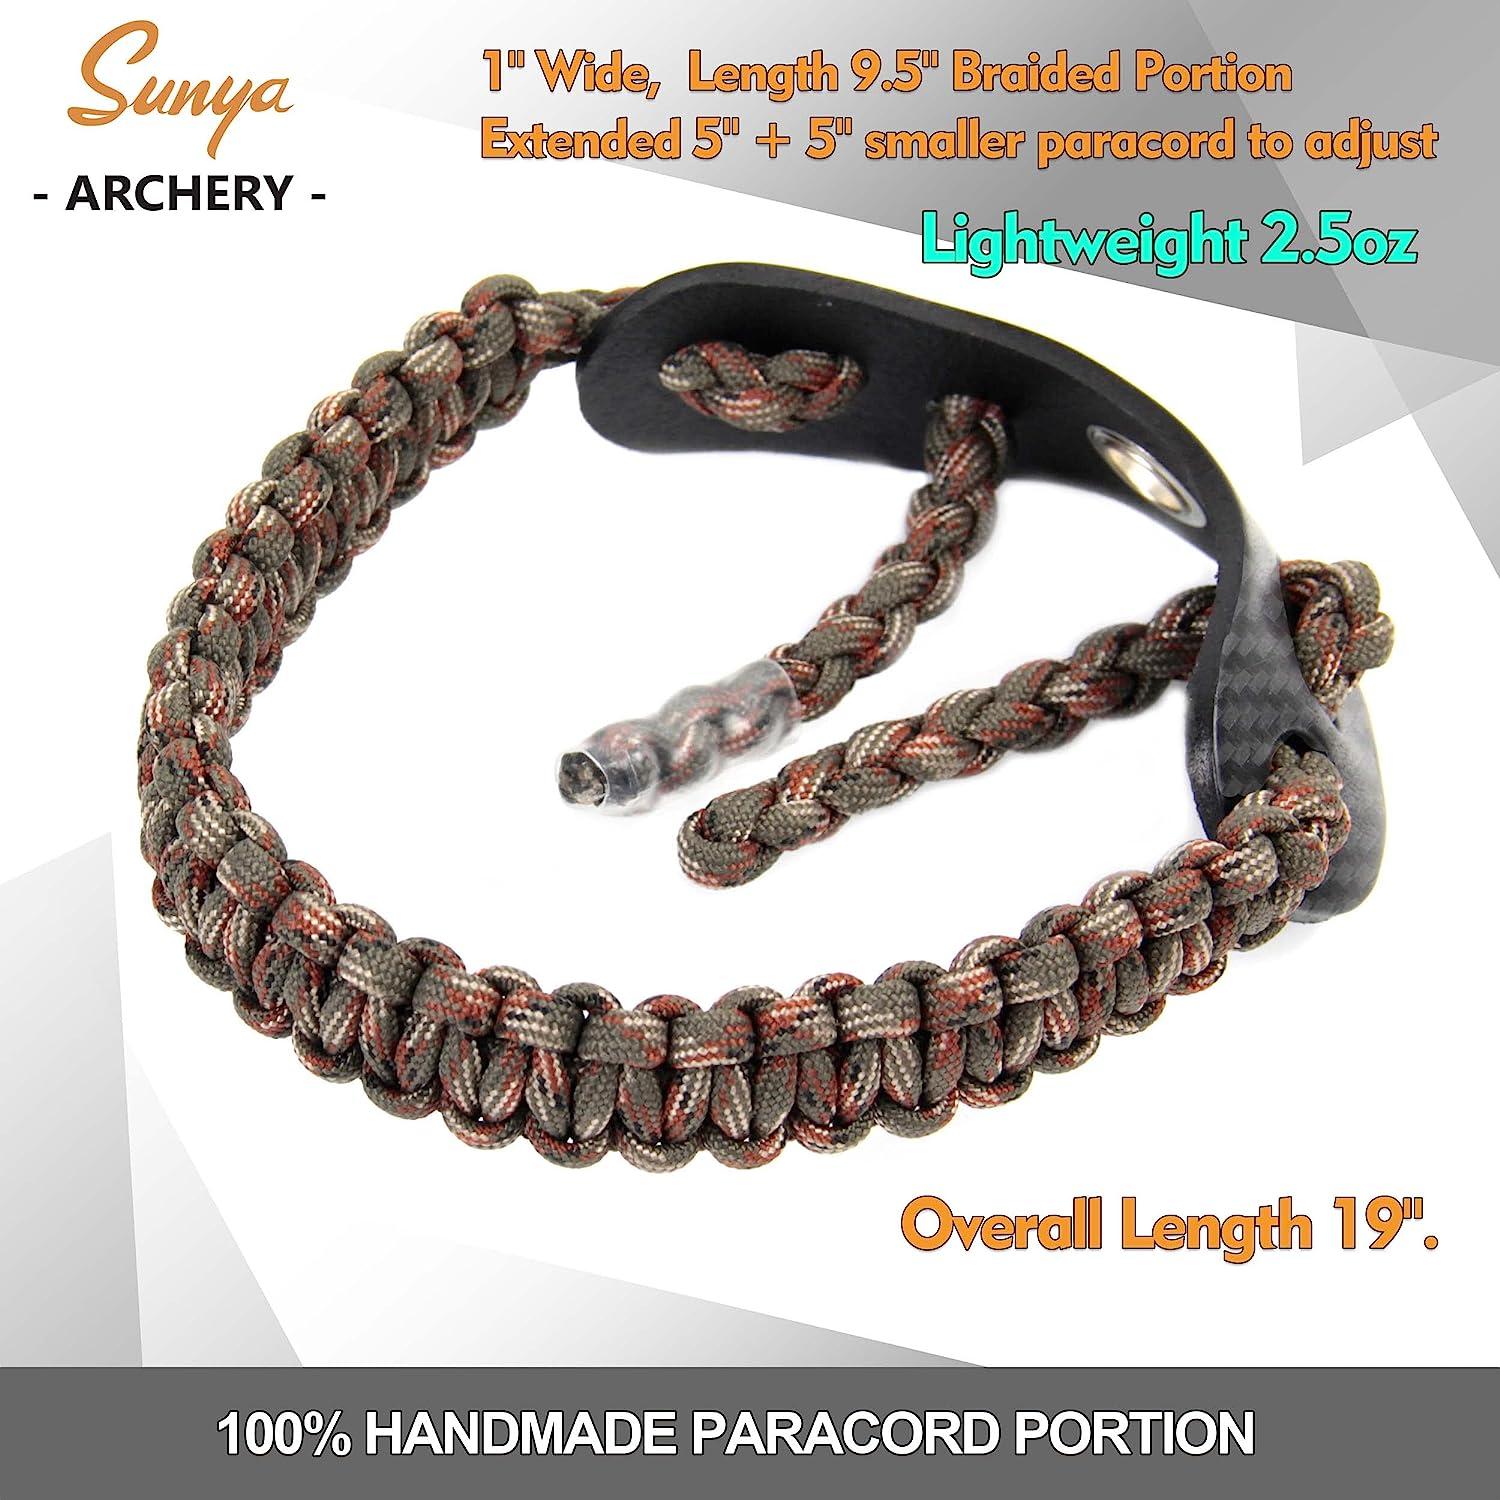 SUNYA Archery Bow Wrist Sling, 550 Paracord Strap Comfortable on Hand.100%  Full Grain Leather Yoke, Multiple Camo Colors. Fit Compound Bow Stabilizer  DS Dark Camo (CB)